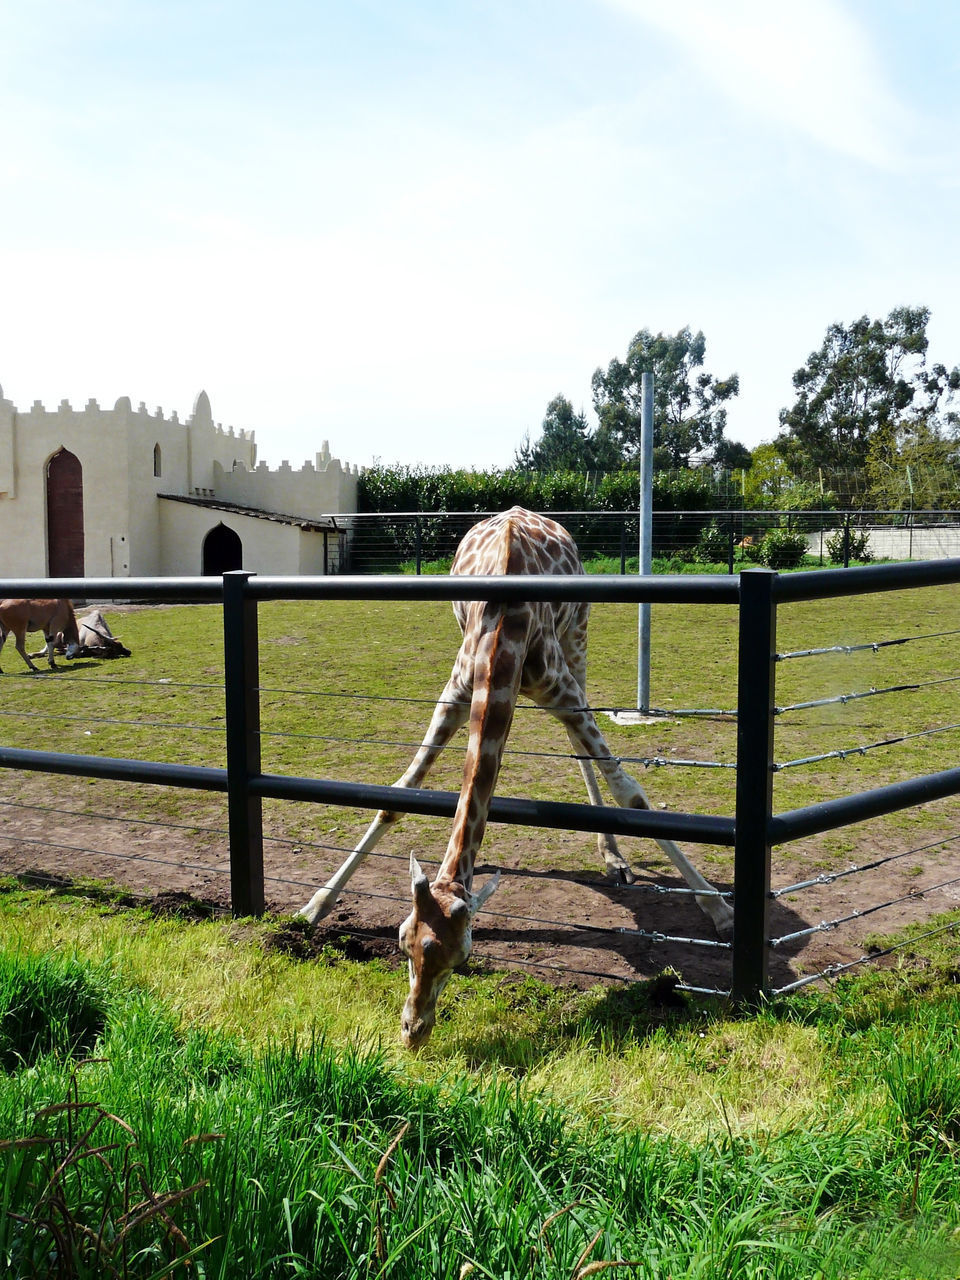 VIEW OF HORSE IN RANCH